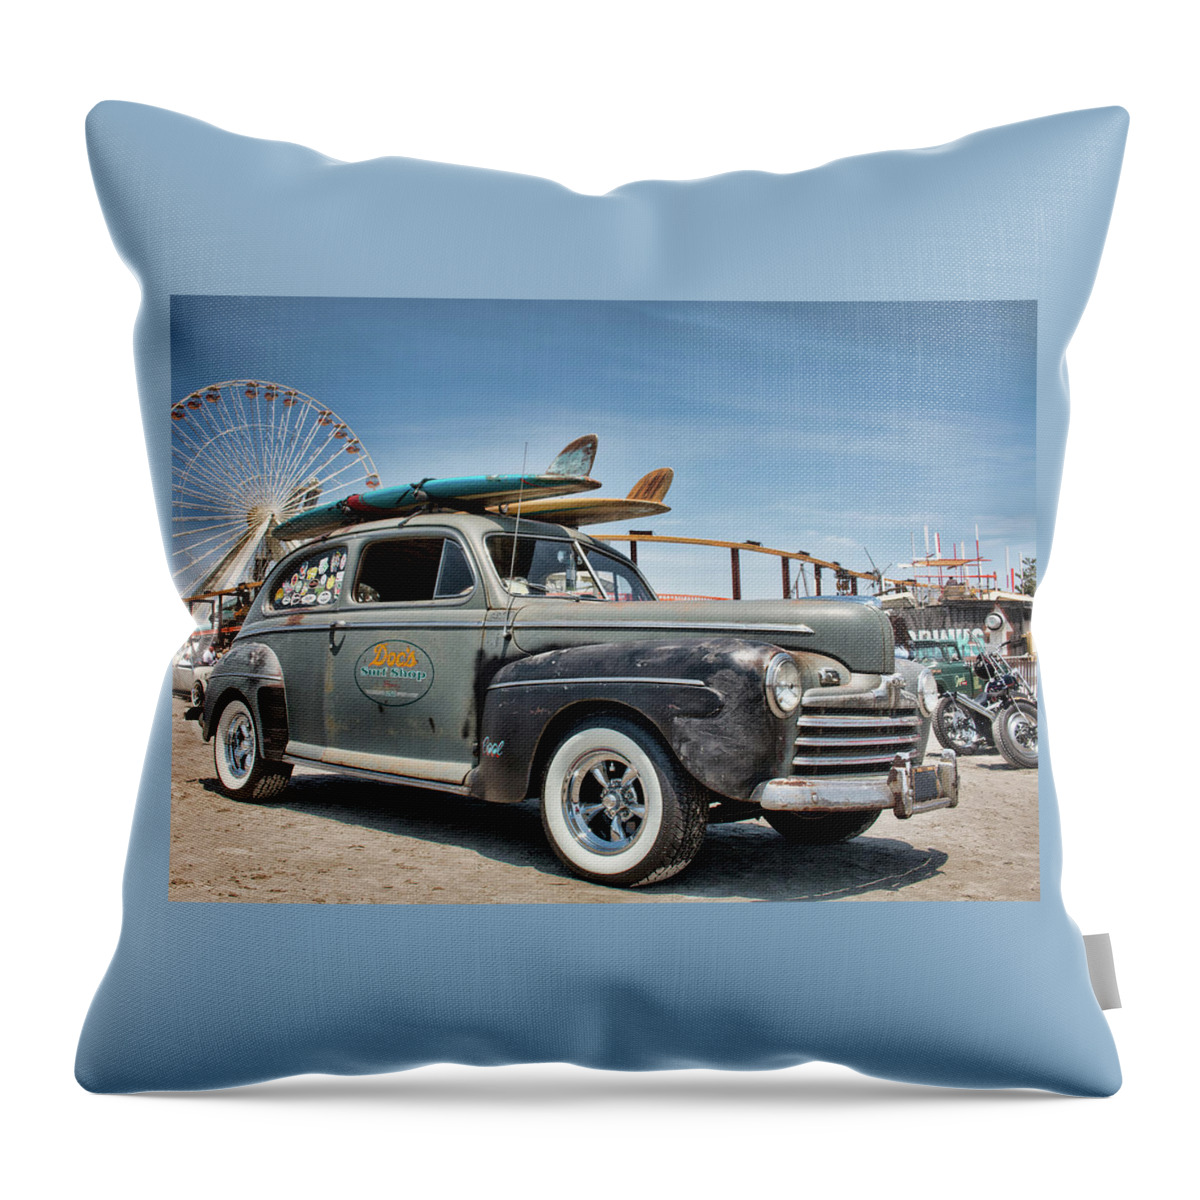 The Race Of Gentlemen Throw Pillow featuring the photograph Going Surfing by Kristia Adams